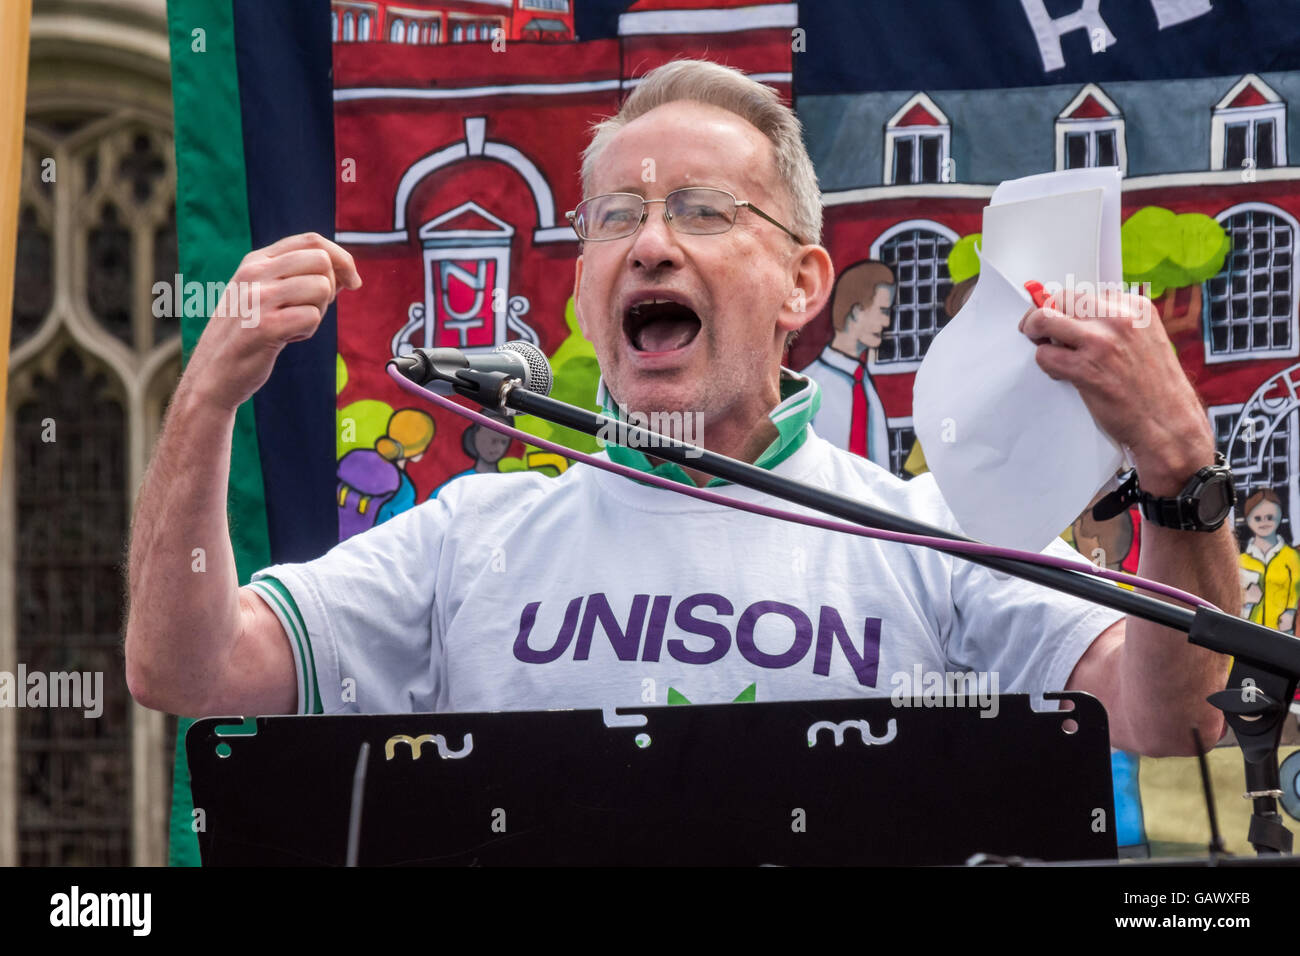 London, UK. 5th July, 2016. John McLoughlin of Tower Hamlets Unison, the union which represents teaching assistants and other ancillary staff in schools, speaks at the NUT rally in Parliament Square after their march through London on the day of their strike against cuts in government funding and the increasing deregulation of teachers' pay and conditions through the increasing pressure on schools to become academies. Credit:  Peter Marshall/Alamy Live News Stock Photo